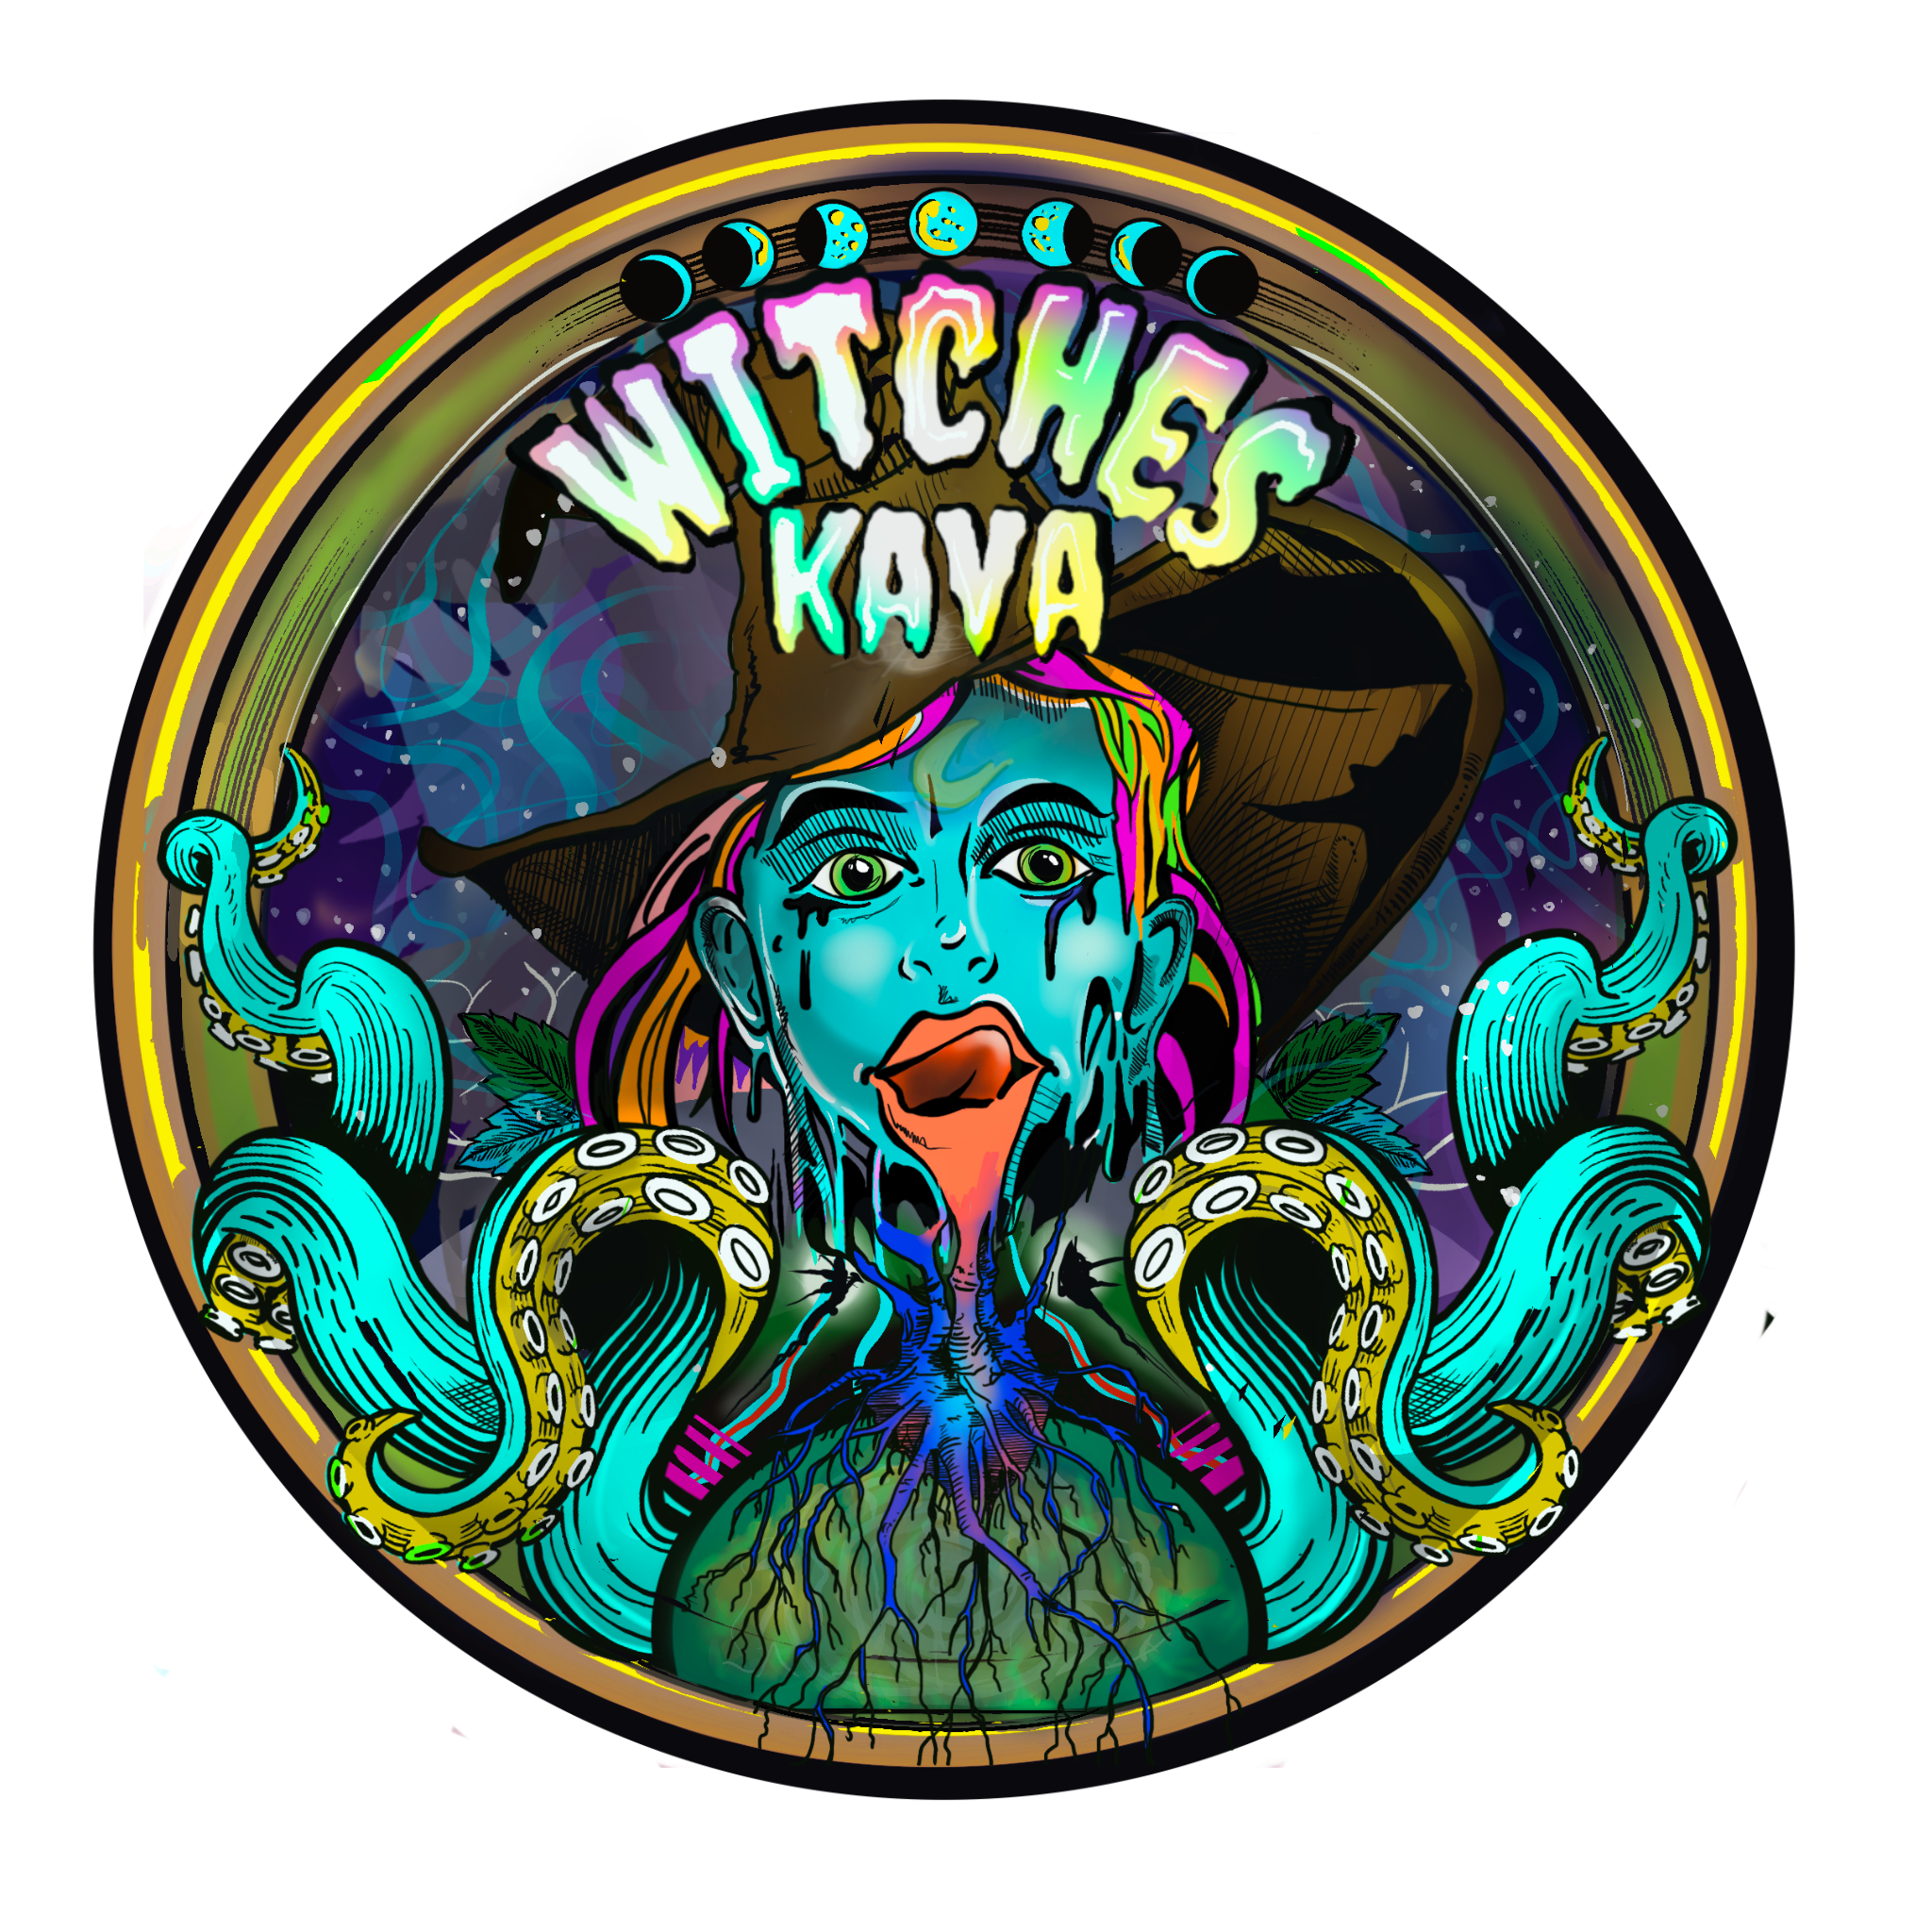 Witches Kava